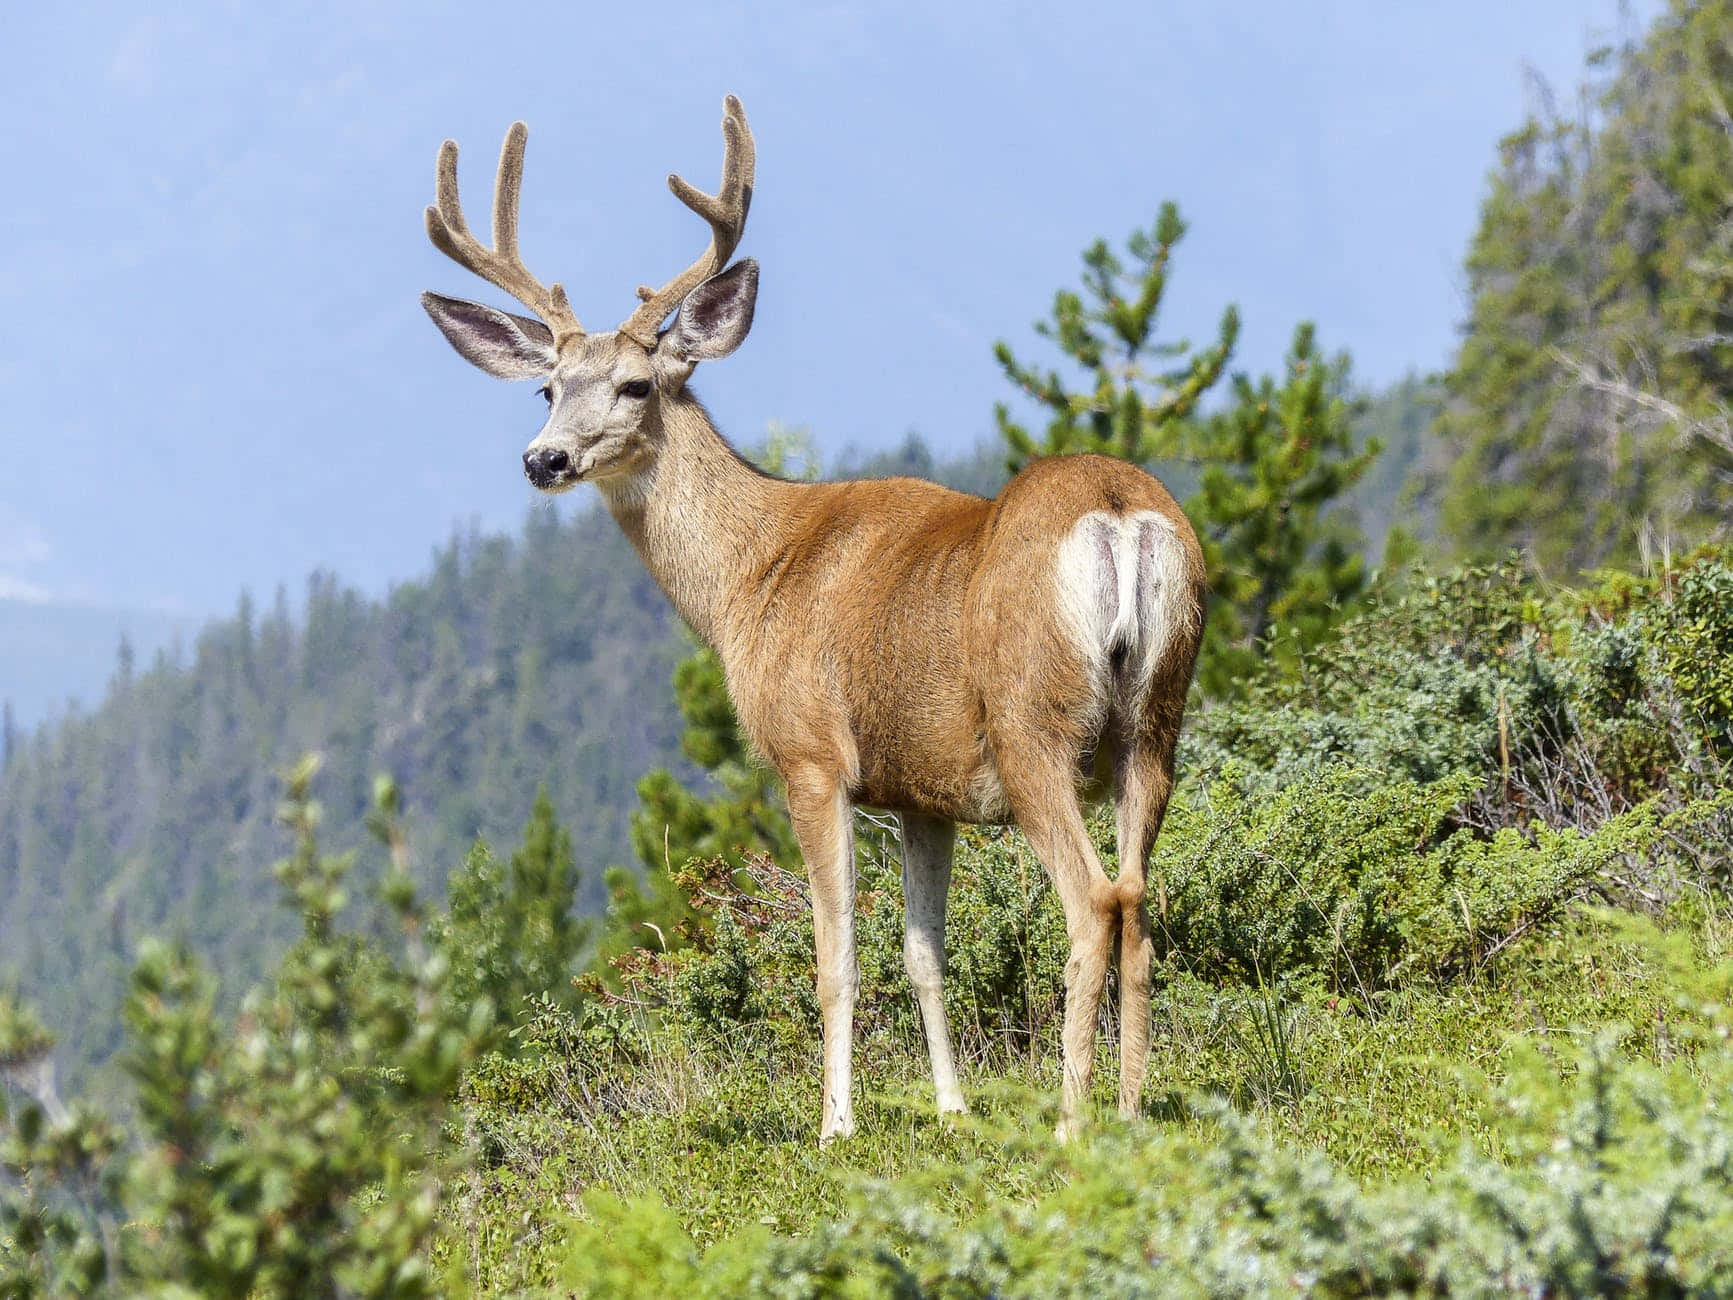 A magnificent deer pausing in the forest